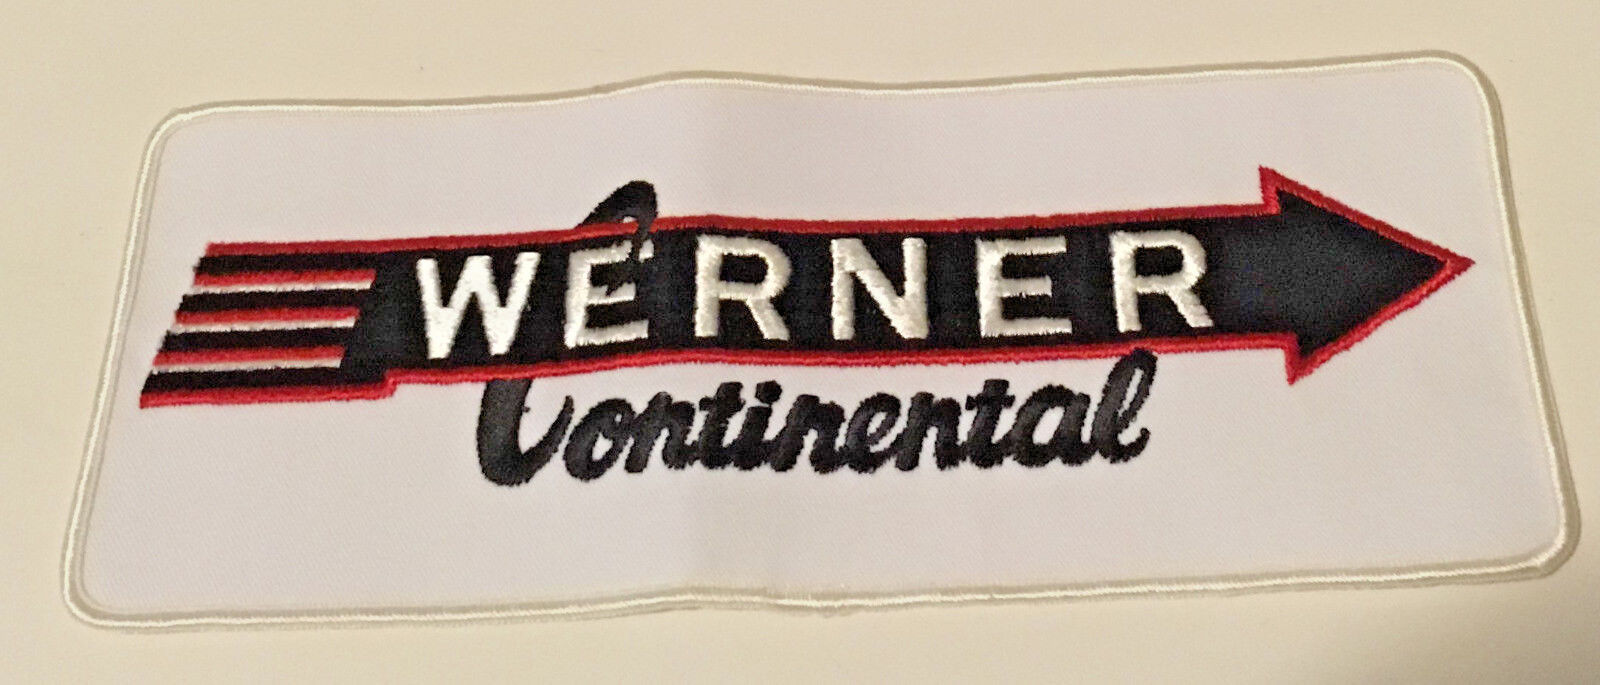 Werner Continental truck driver patch jacket size 3-3/4 X 9-1/2 